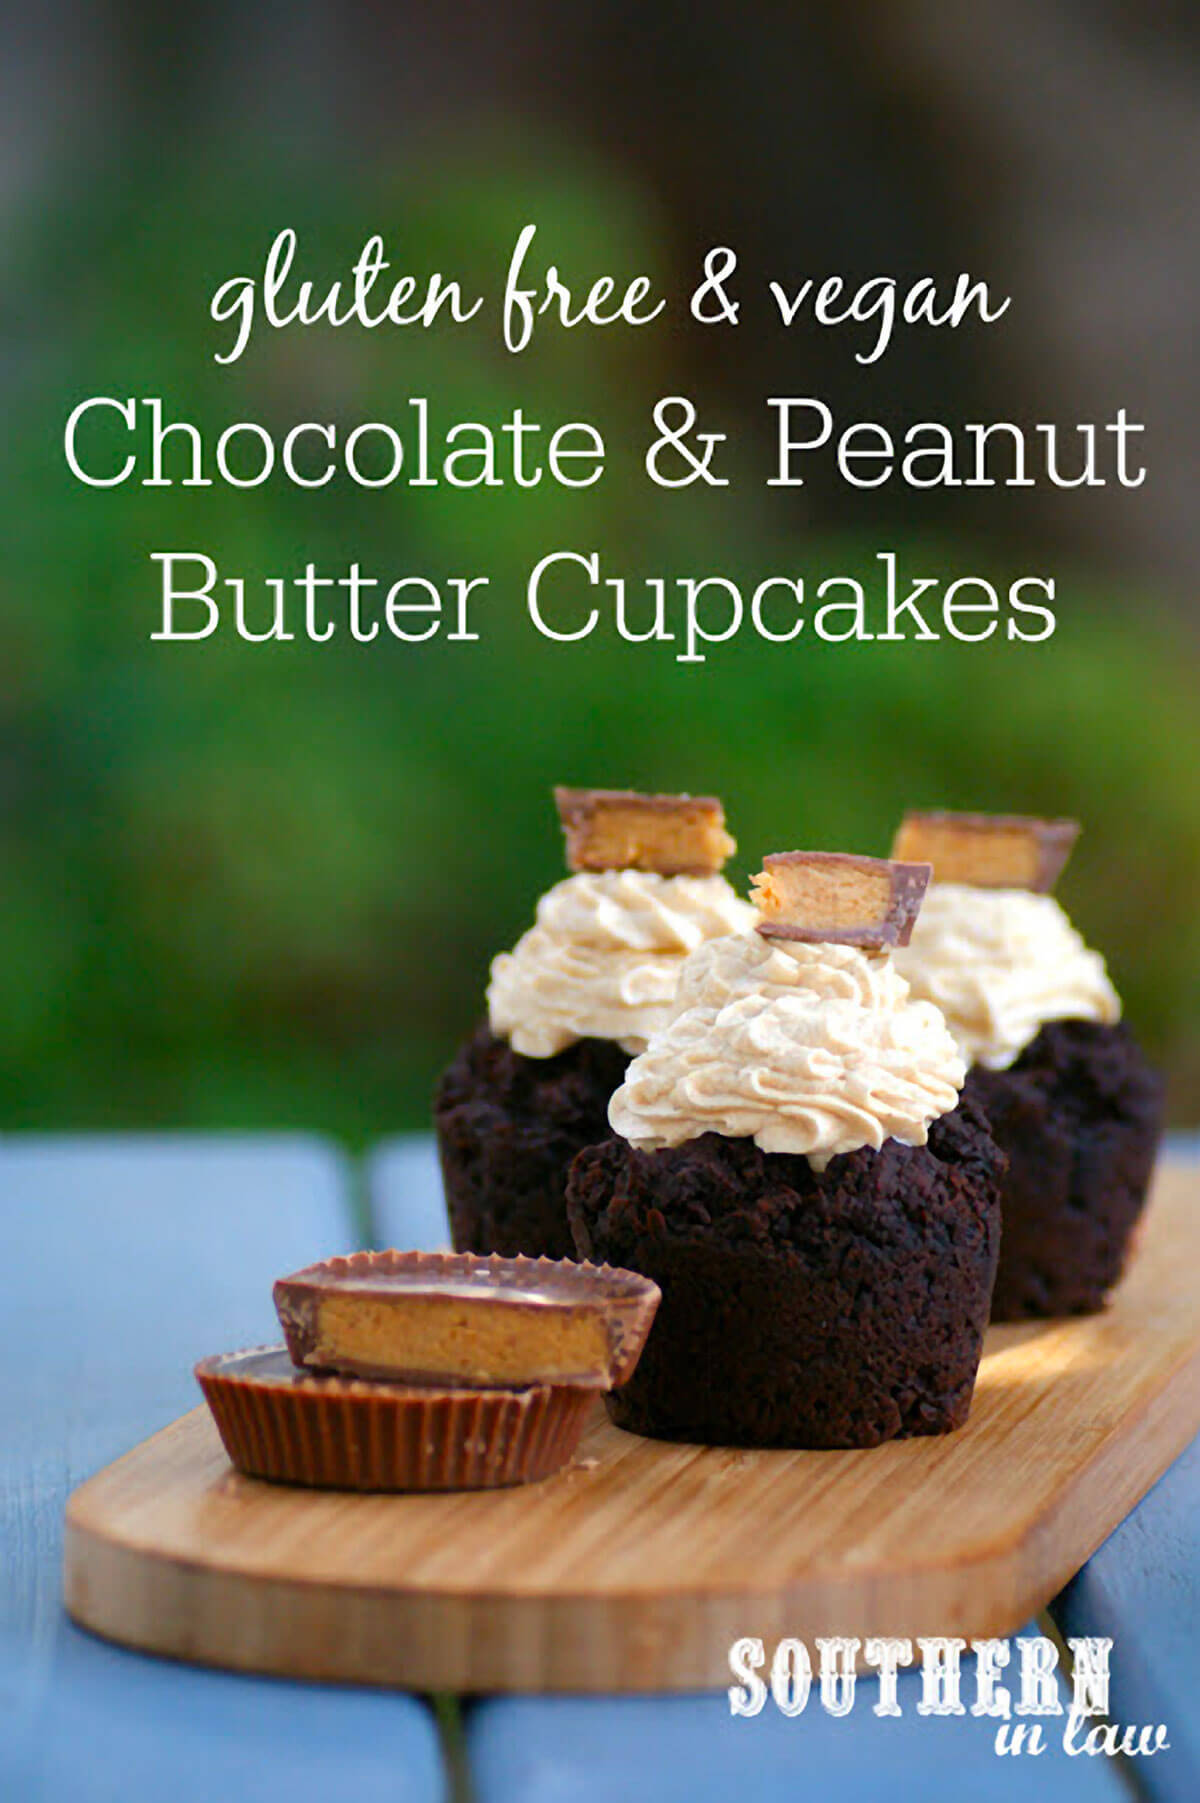 Chocolate and Peanut Butter Cupcakes